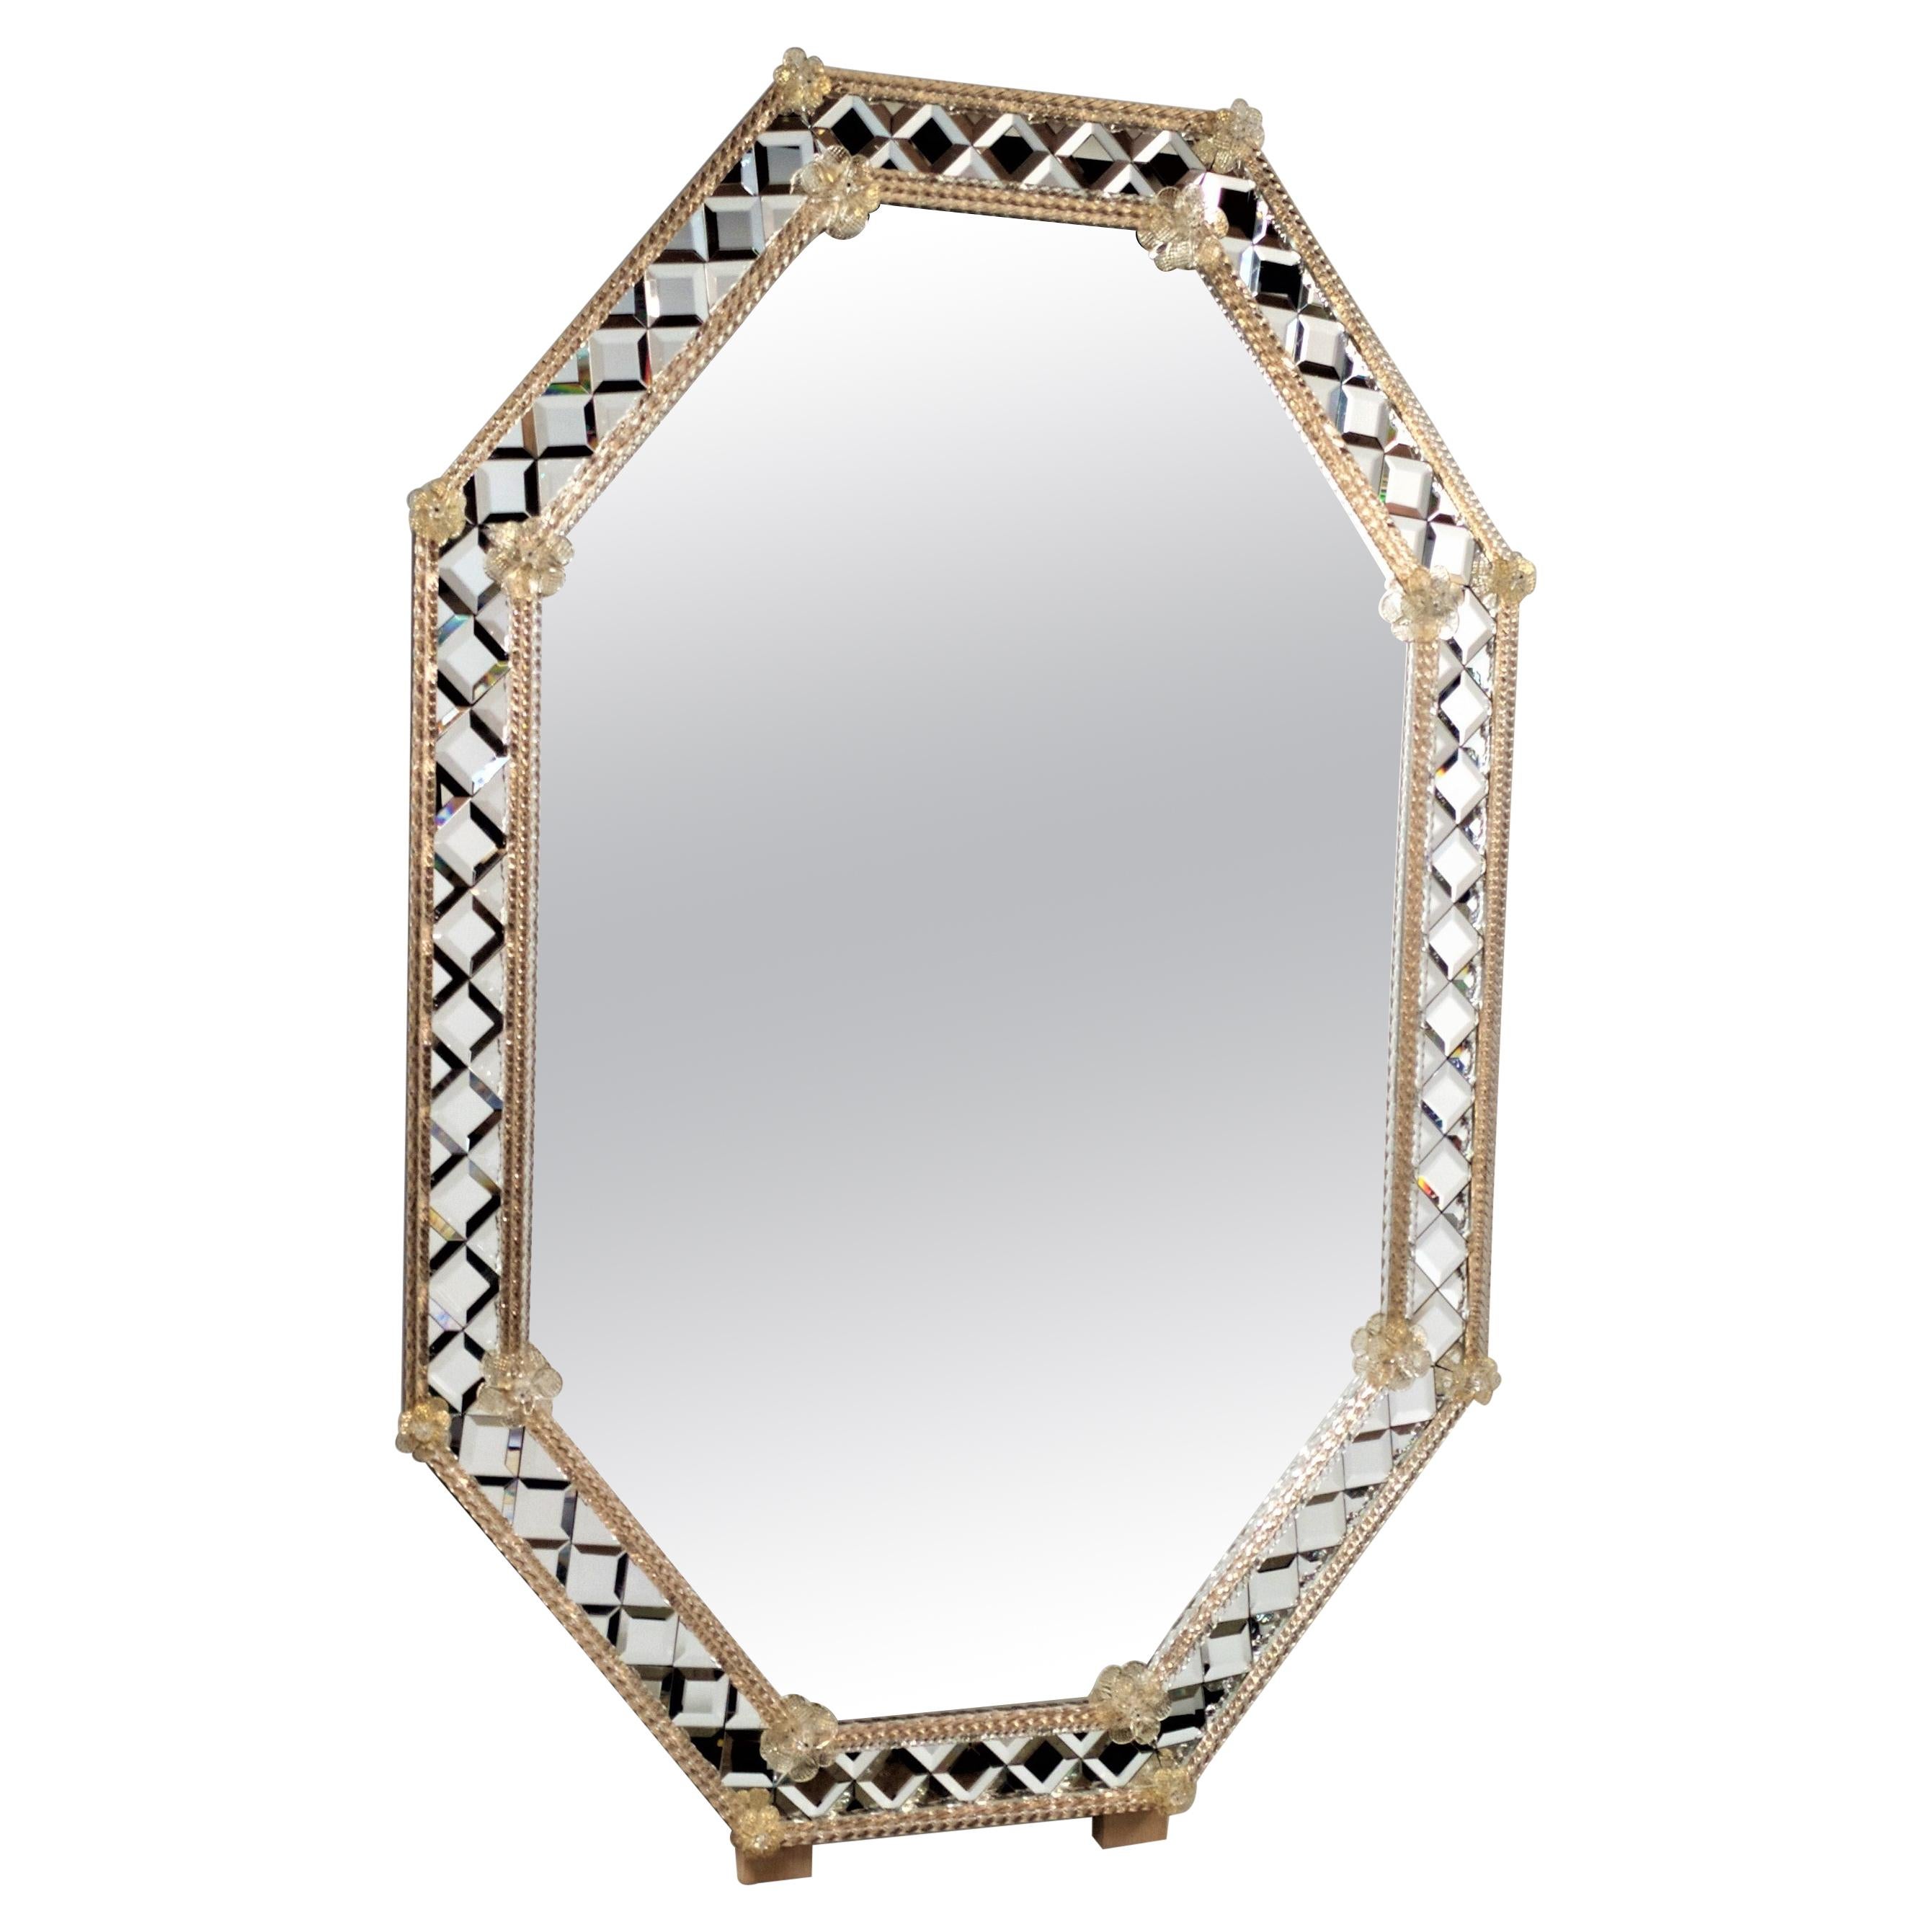 Diamond" Murano Glass Mirror Octagonal, Hand Made, Fratelli Tosi Made in  Italy For Sale at 1stDibs